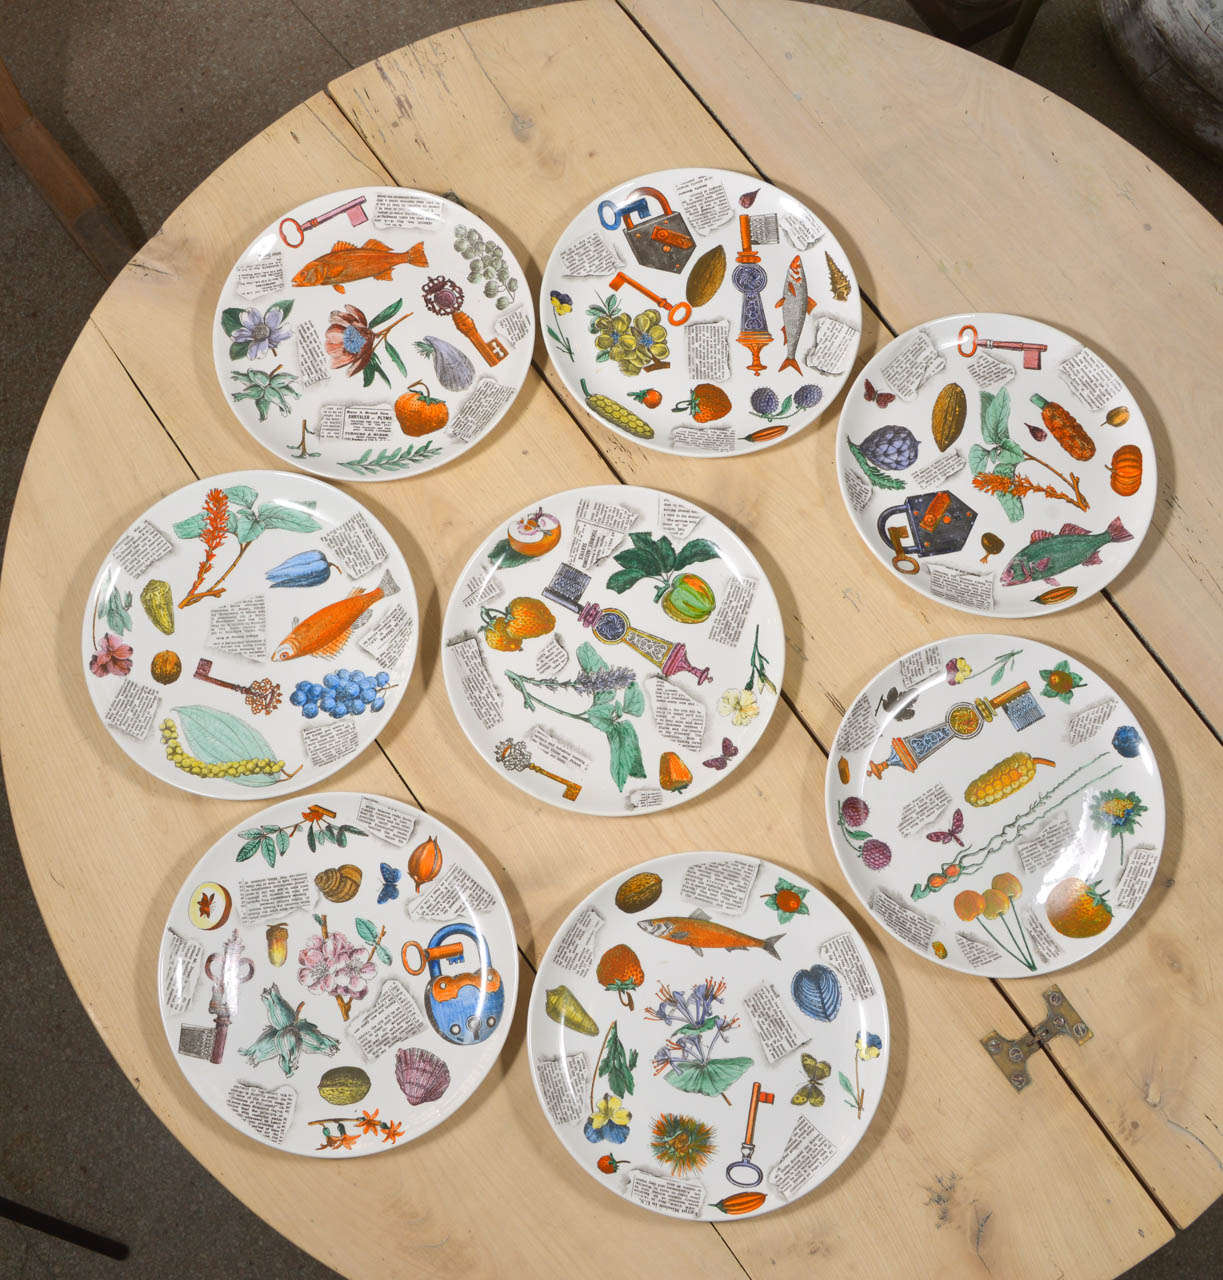 Fornasetti 10.50 in plates.
Perfect condition.
Every plate is different from the others.
Fabulous images.
Wonderful colors.
Simple shape.